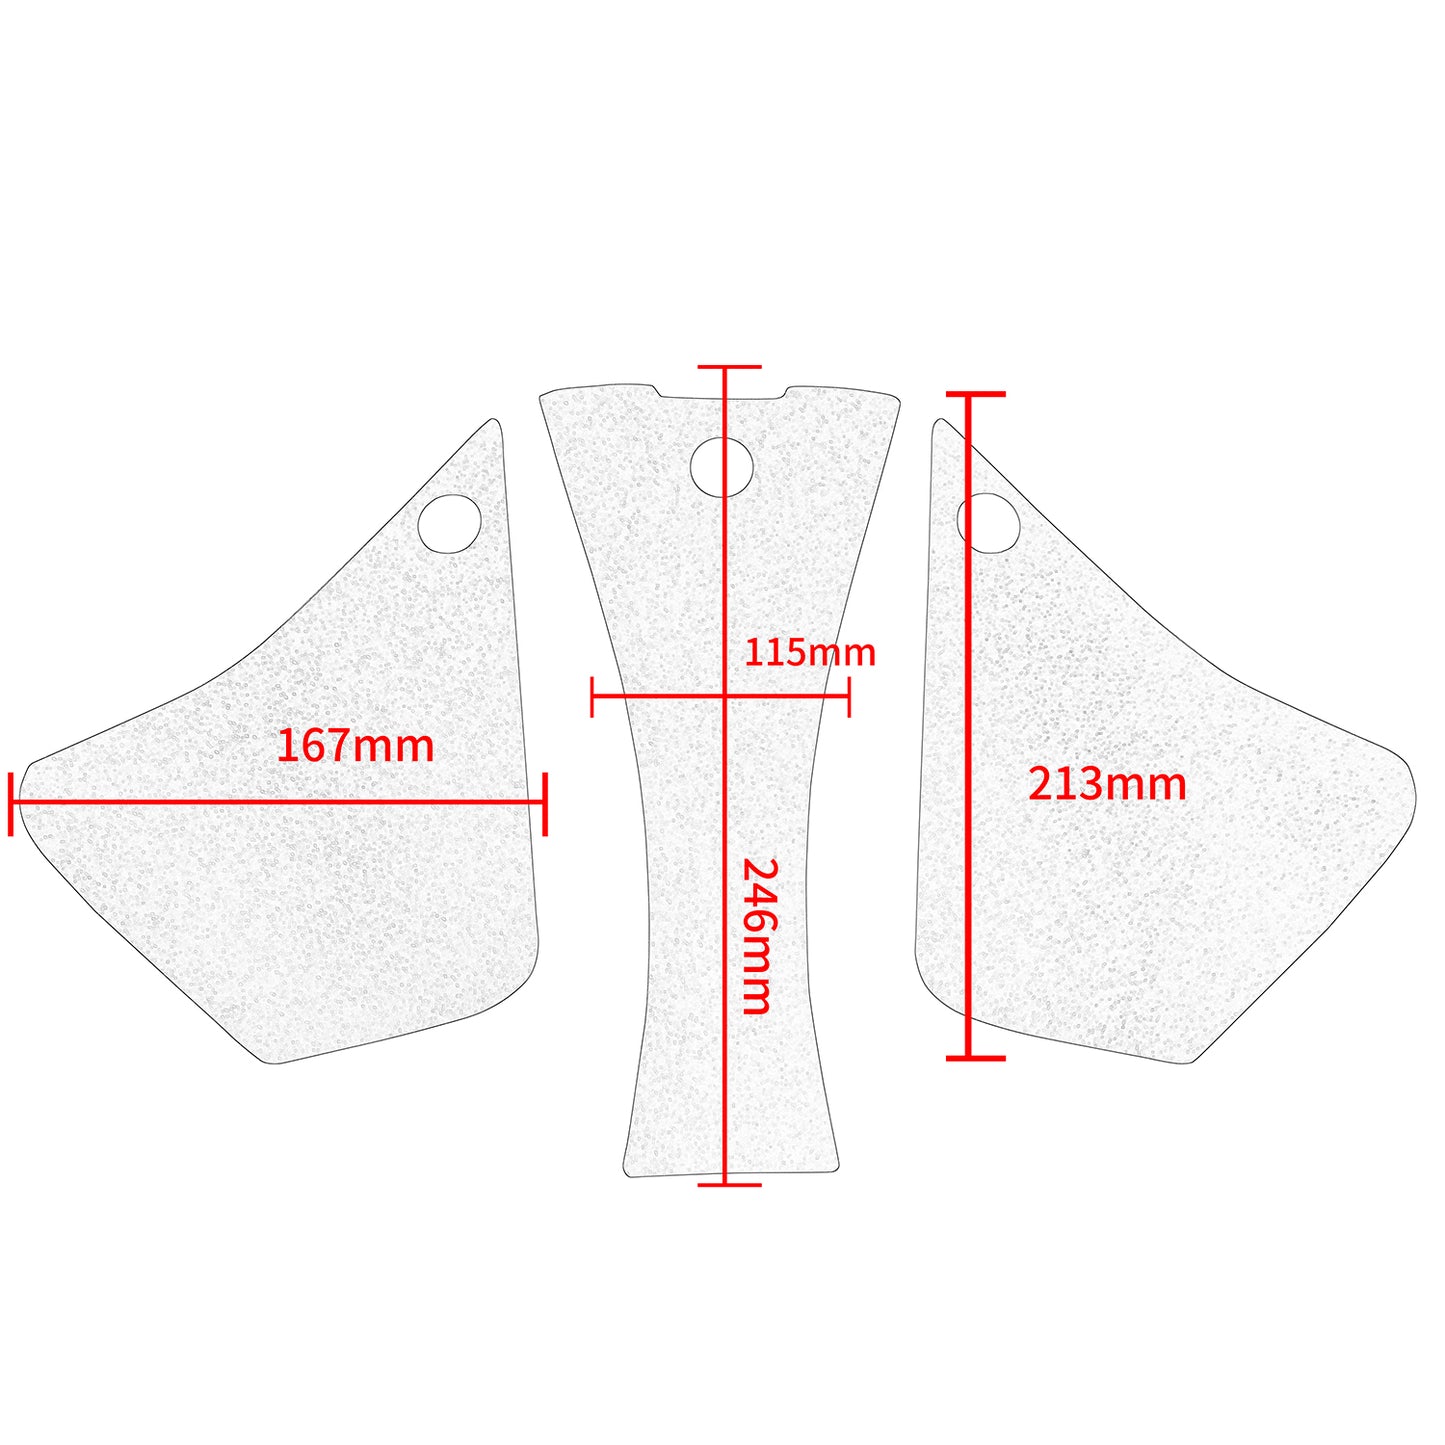 Wolfline Motorcycle Anti Slip Tank Pad Stickers Side Gas Tank Pad Knee Grip Decals Protection For Kawasaki Z1000 Z 1000 2015 2016 2017 2018 2019 2020 2021